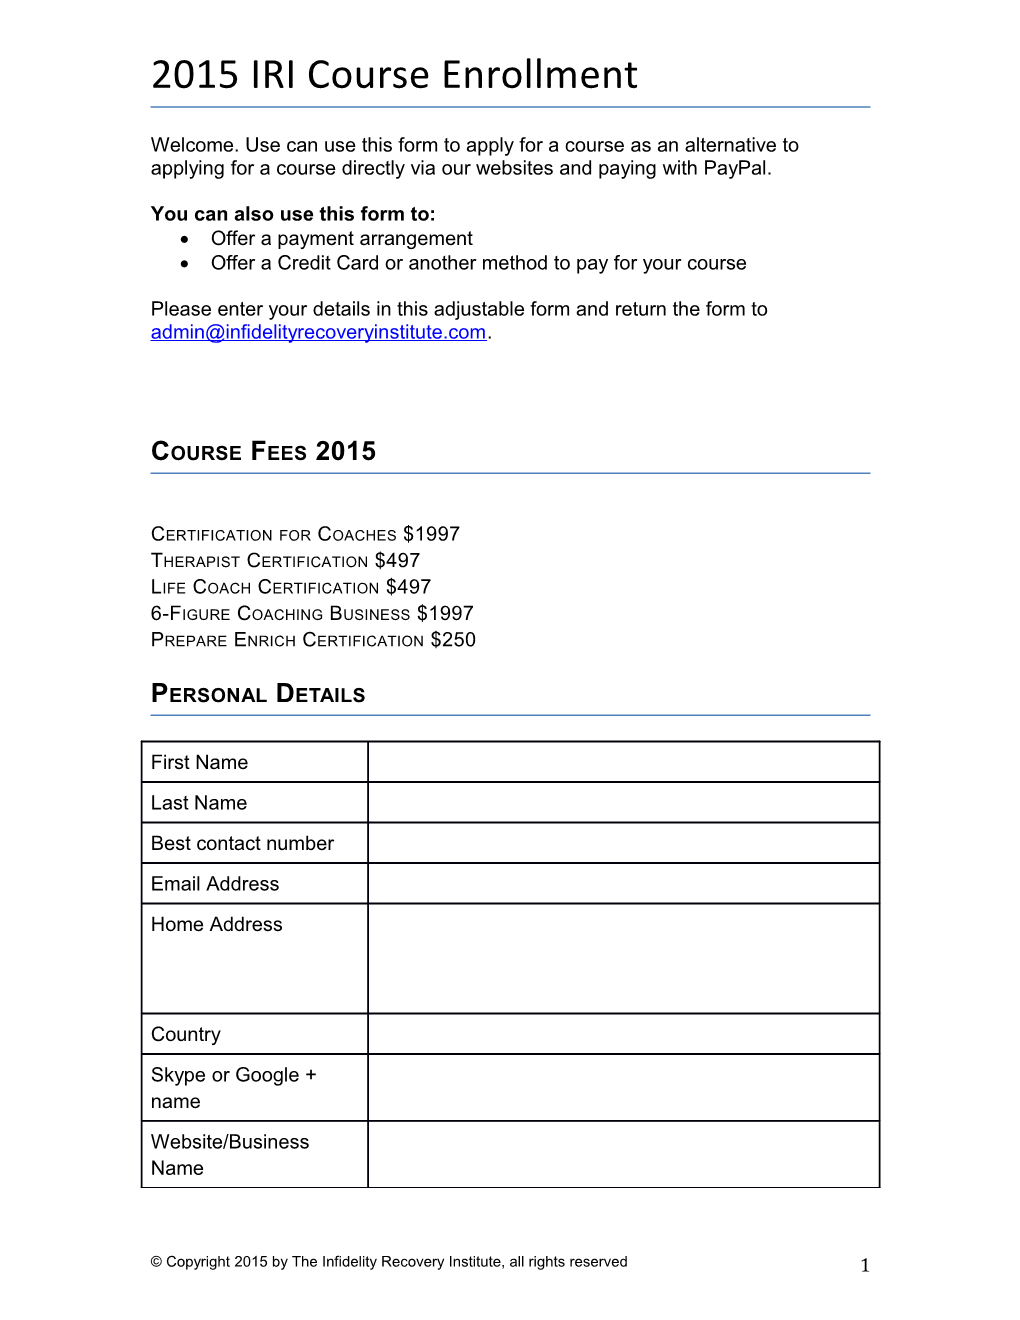 You Can Also Use This Form To